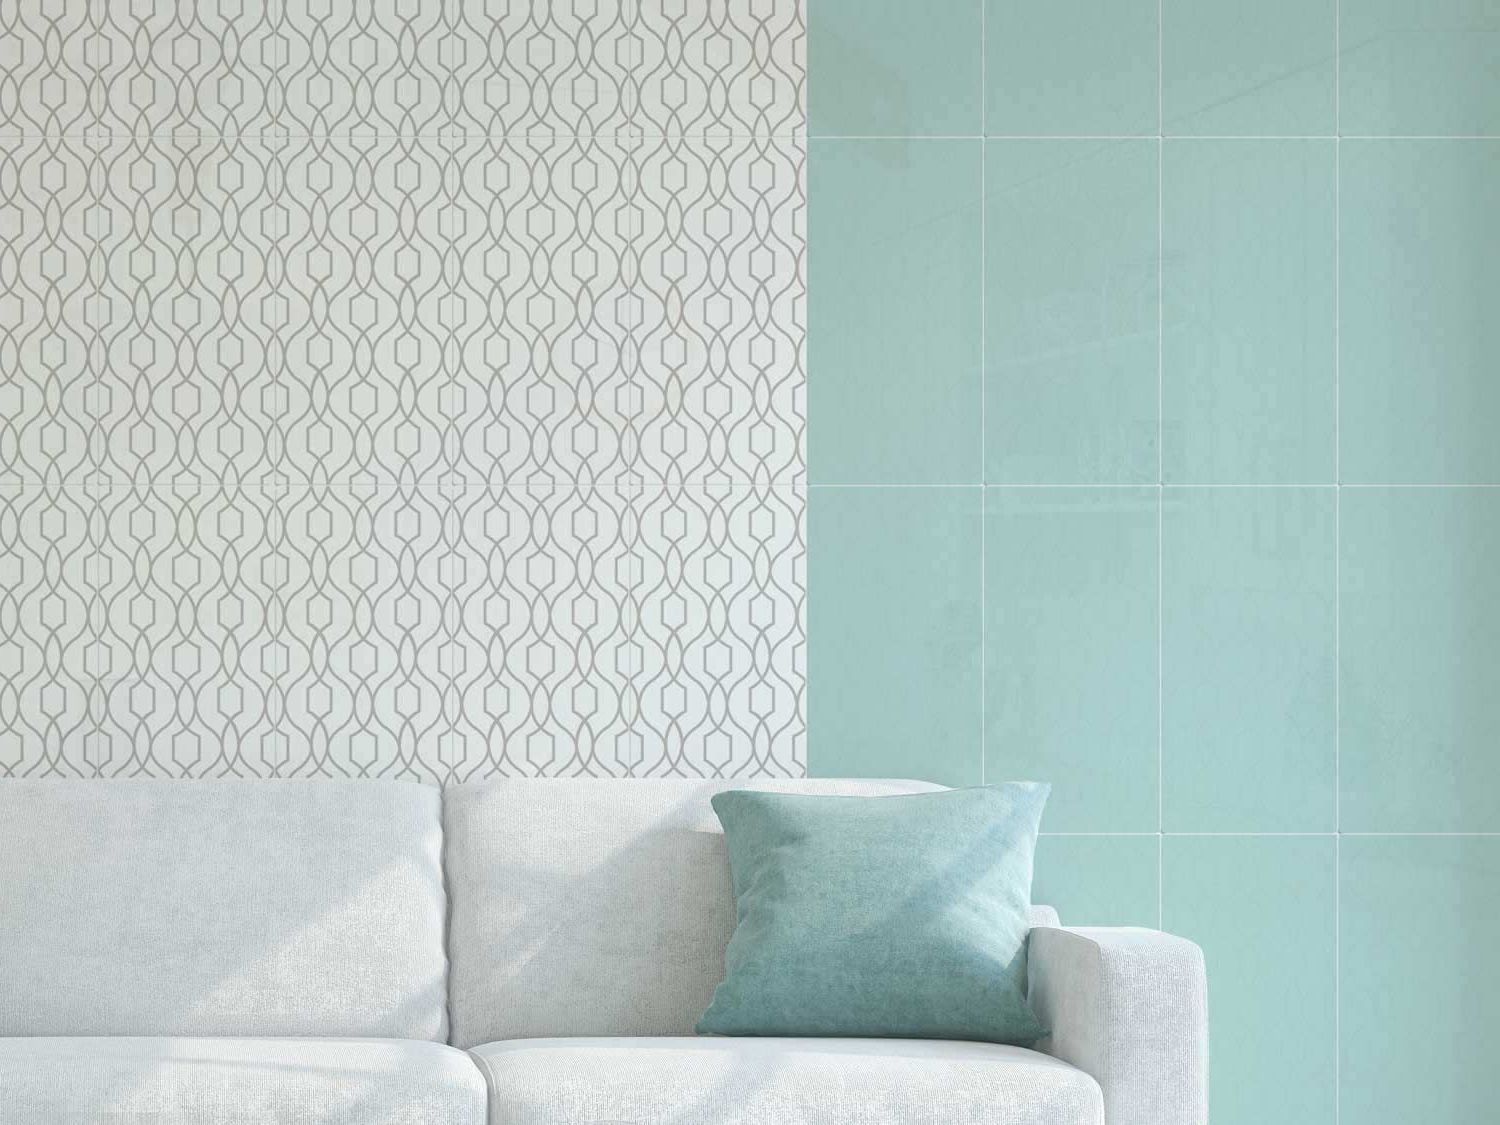 Ophelia Taupe Shiny Ceramic Feature Wall Tile – 600 X 300mm Throughout 2019 Wall Decor By Ophelia & Co (View 19 of 20)